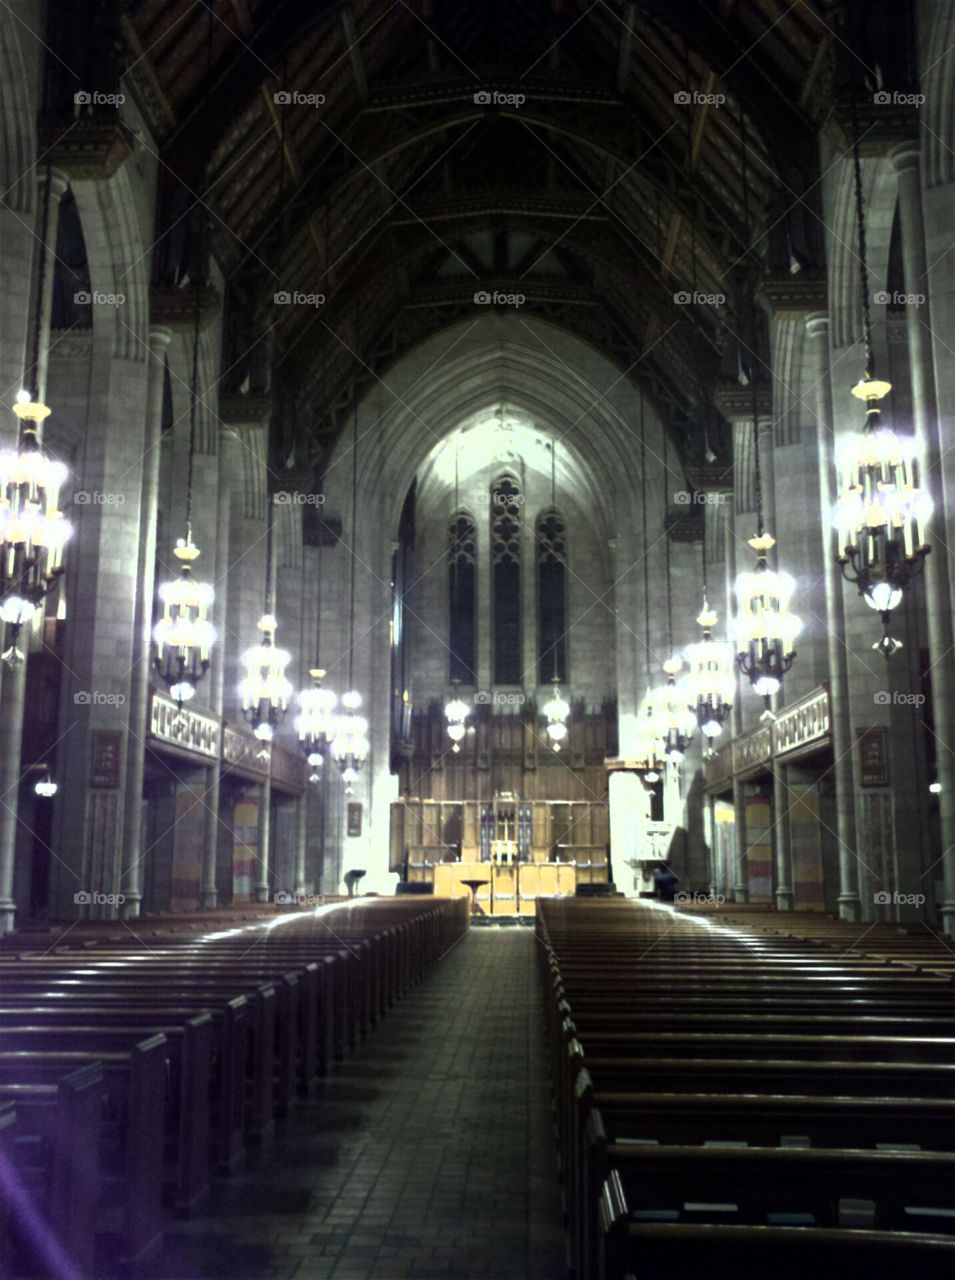 Chicago Cathedral. I love the high arches and solemn atmosphere.